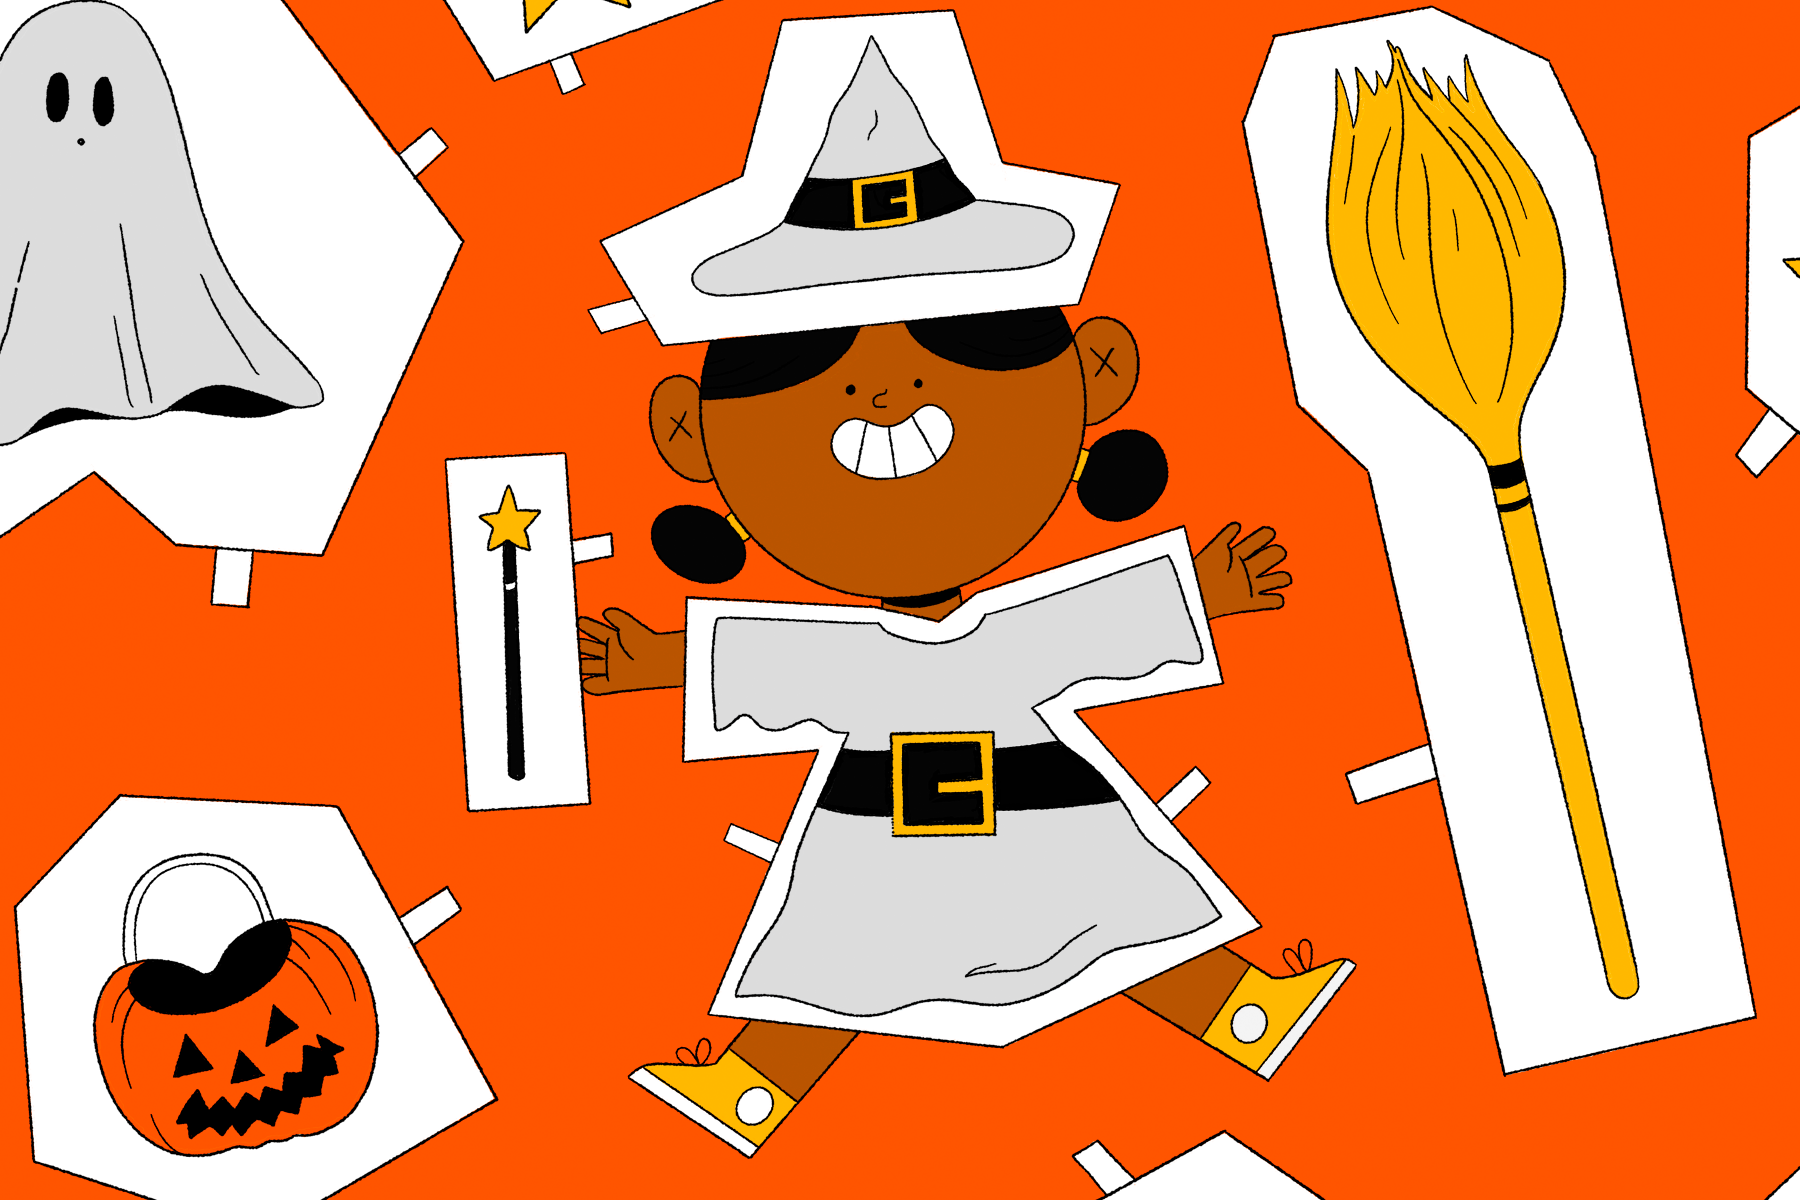 A cartoonish illustration of a dress-your-doll-style cut-out, with a witch in the centre and jack-o-lanterns and brooms around her